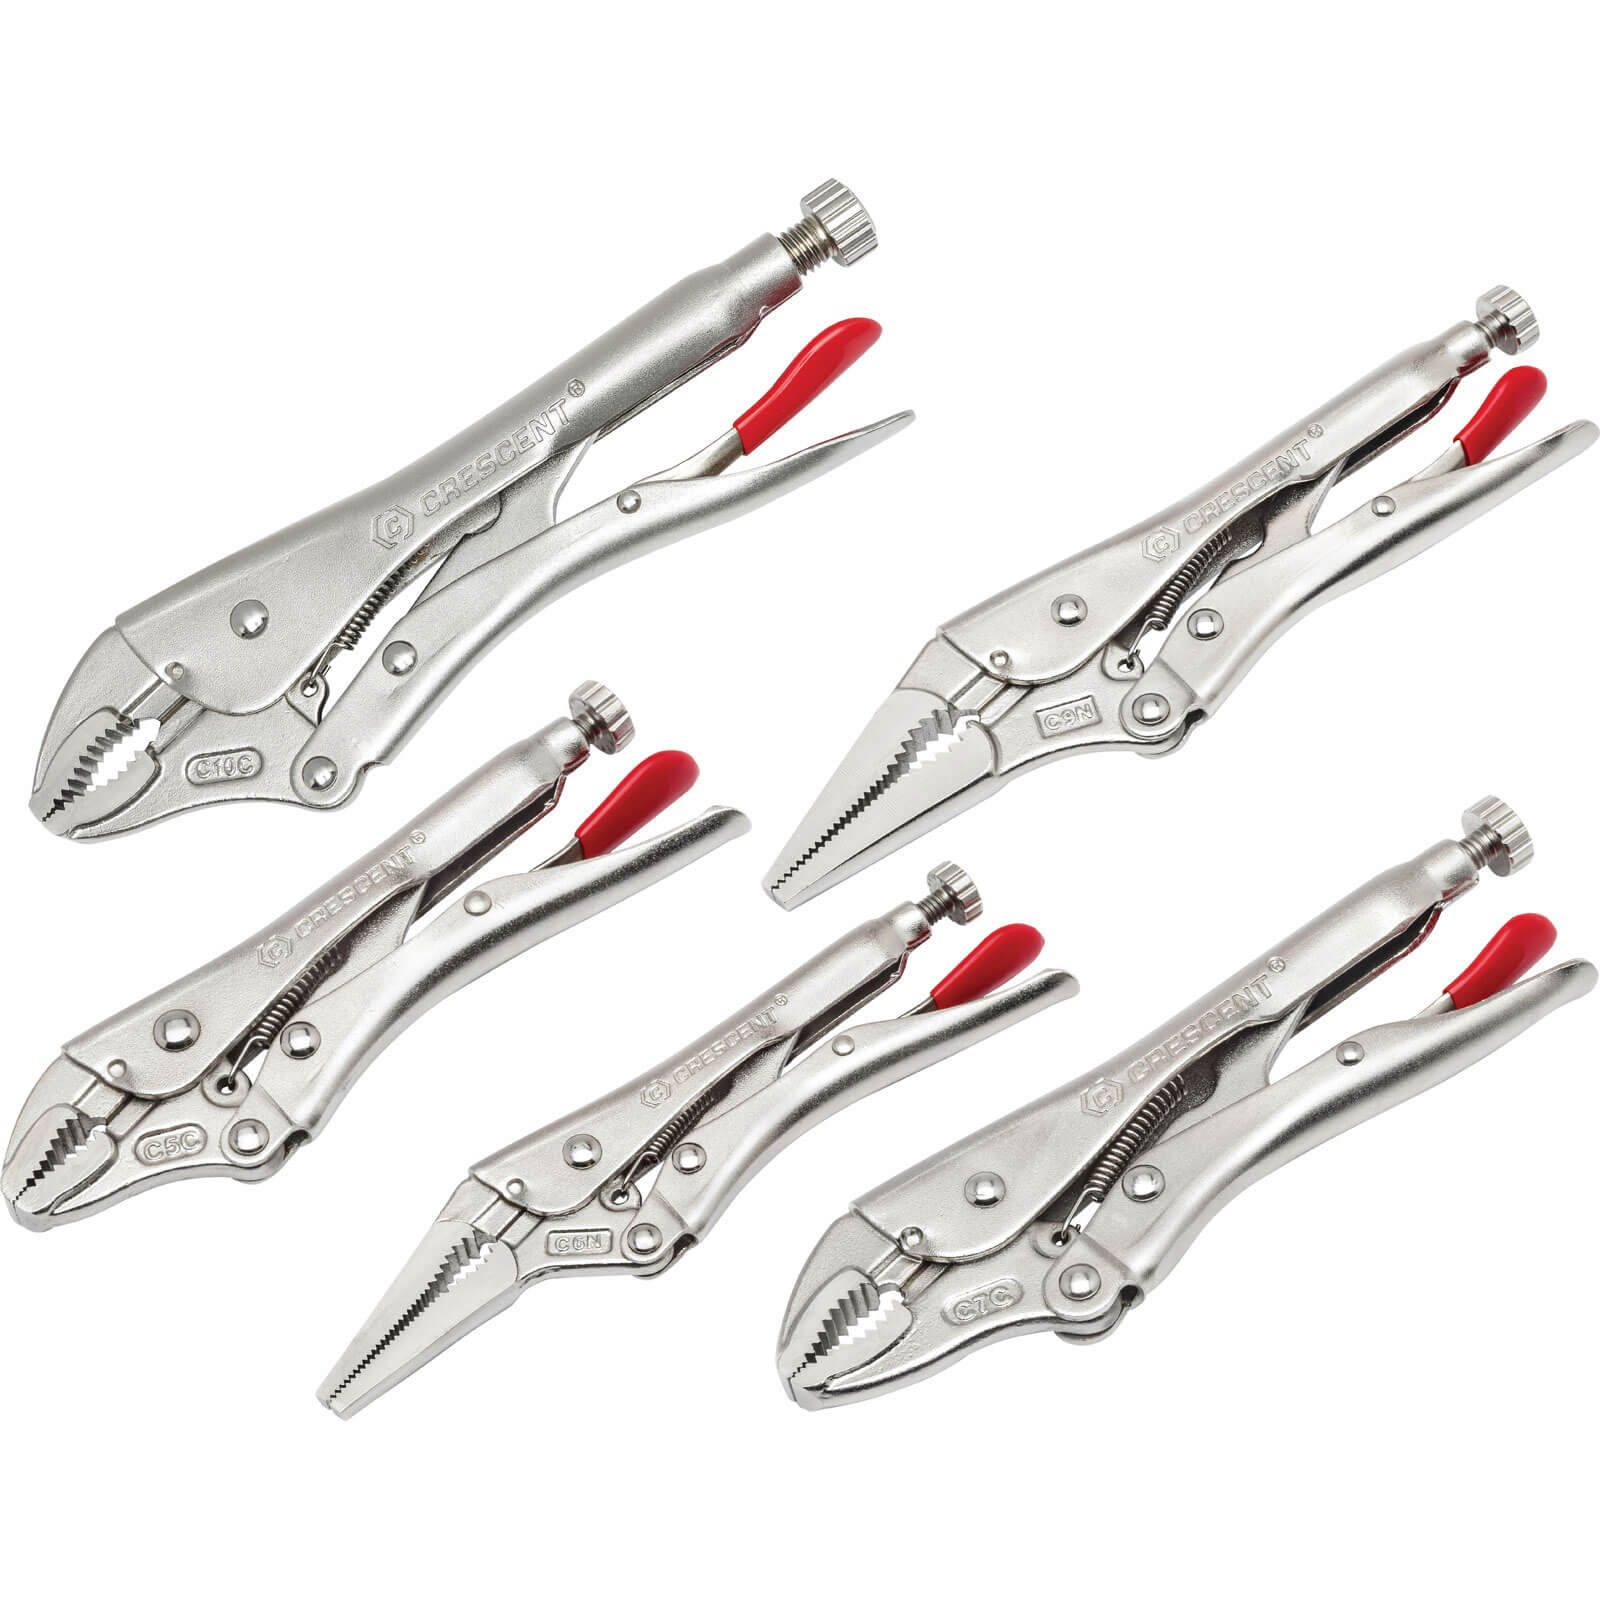 Image of Crescent 5 Piece Locking Pliers With Wire Cutter Set